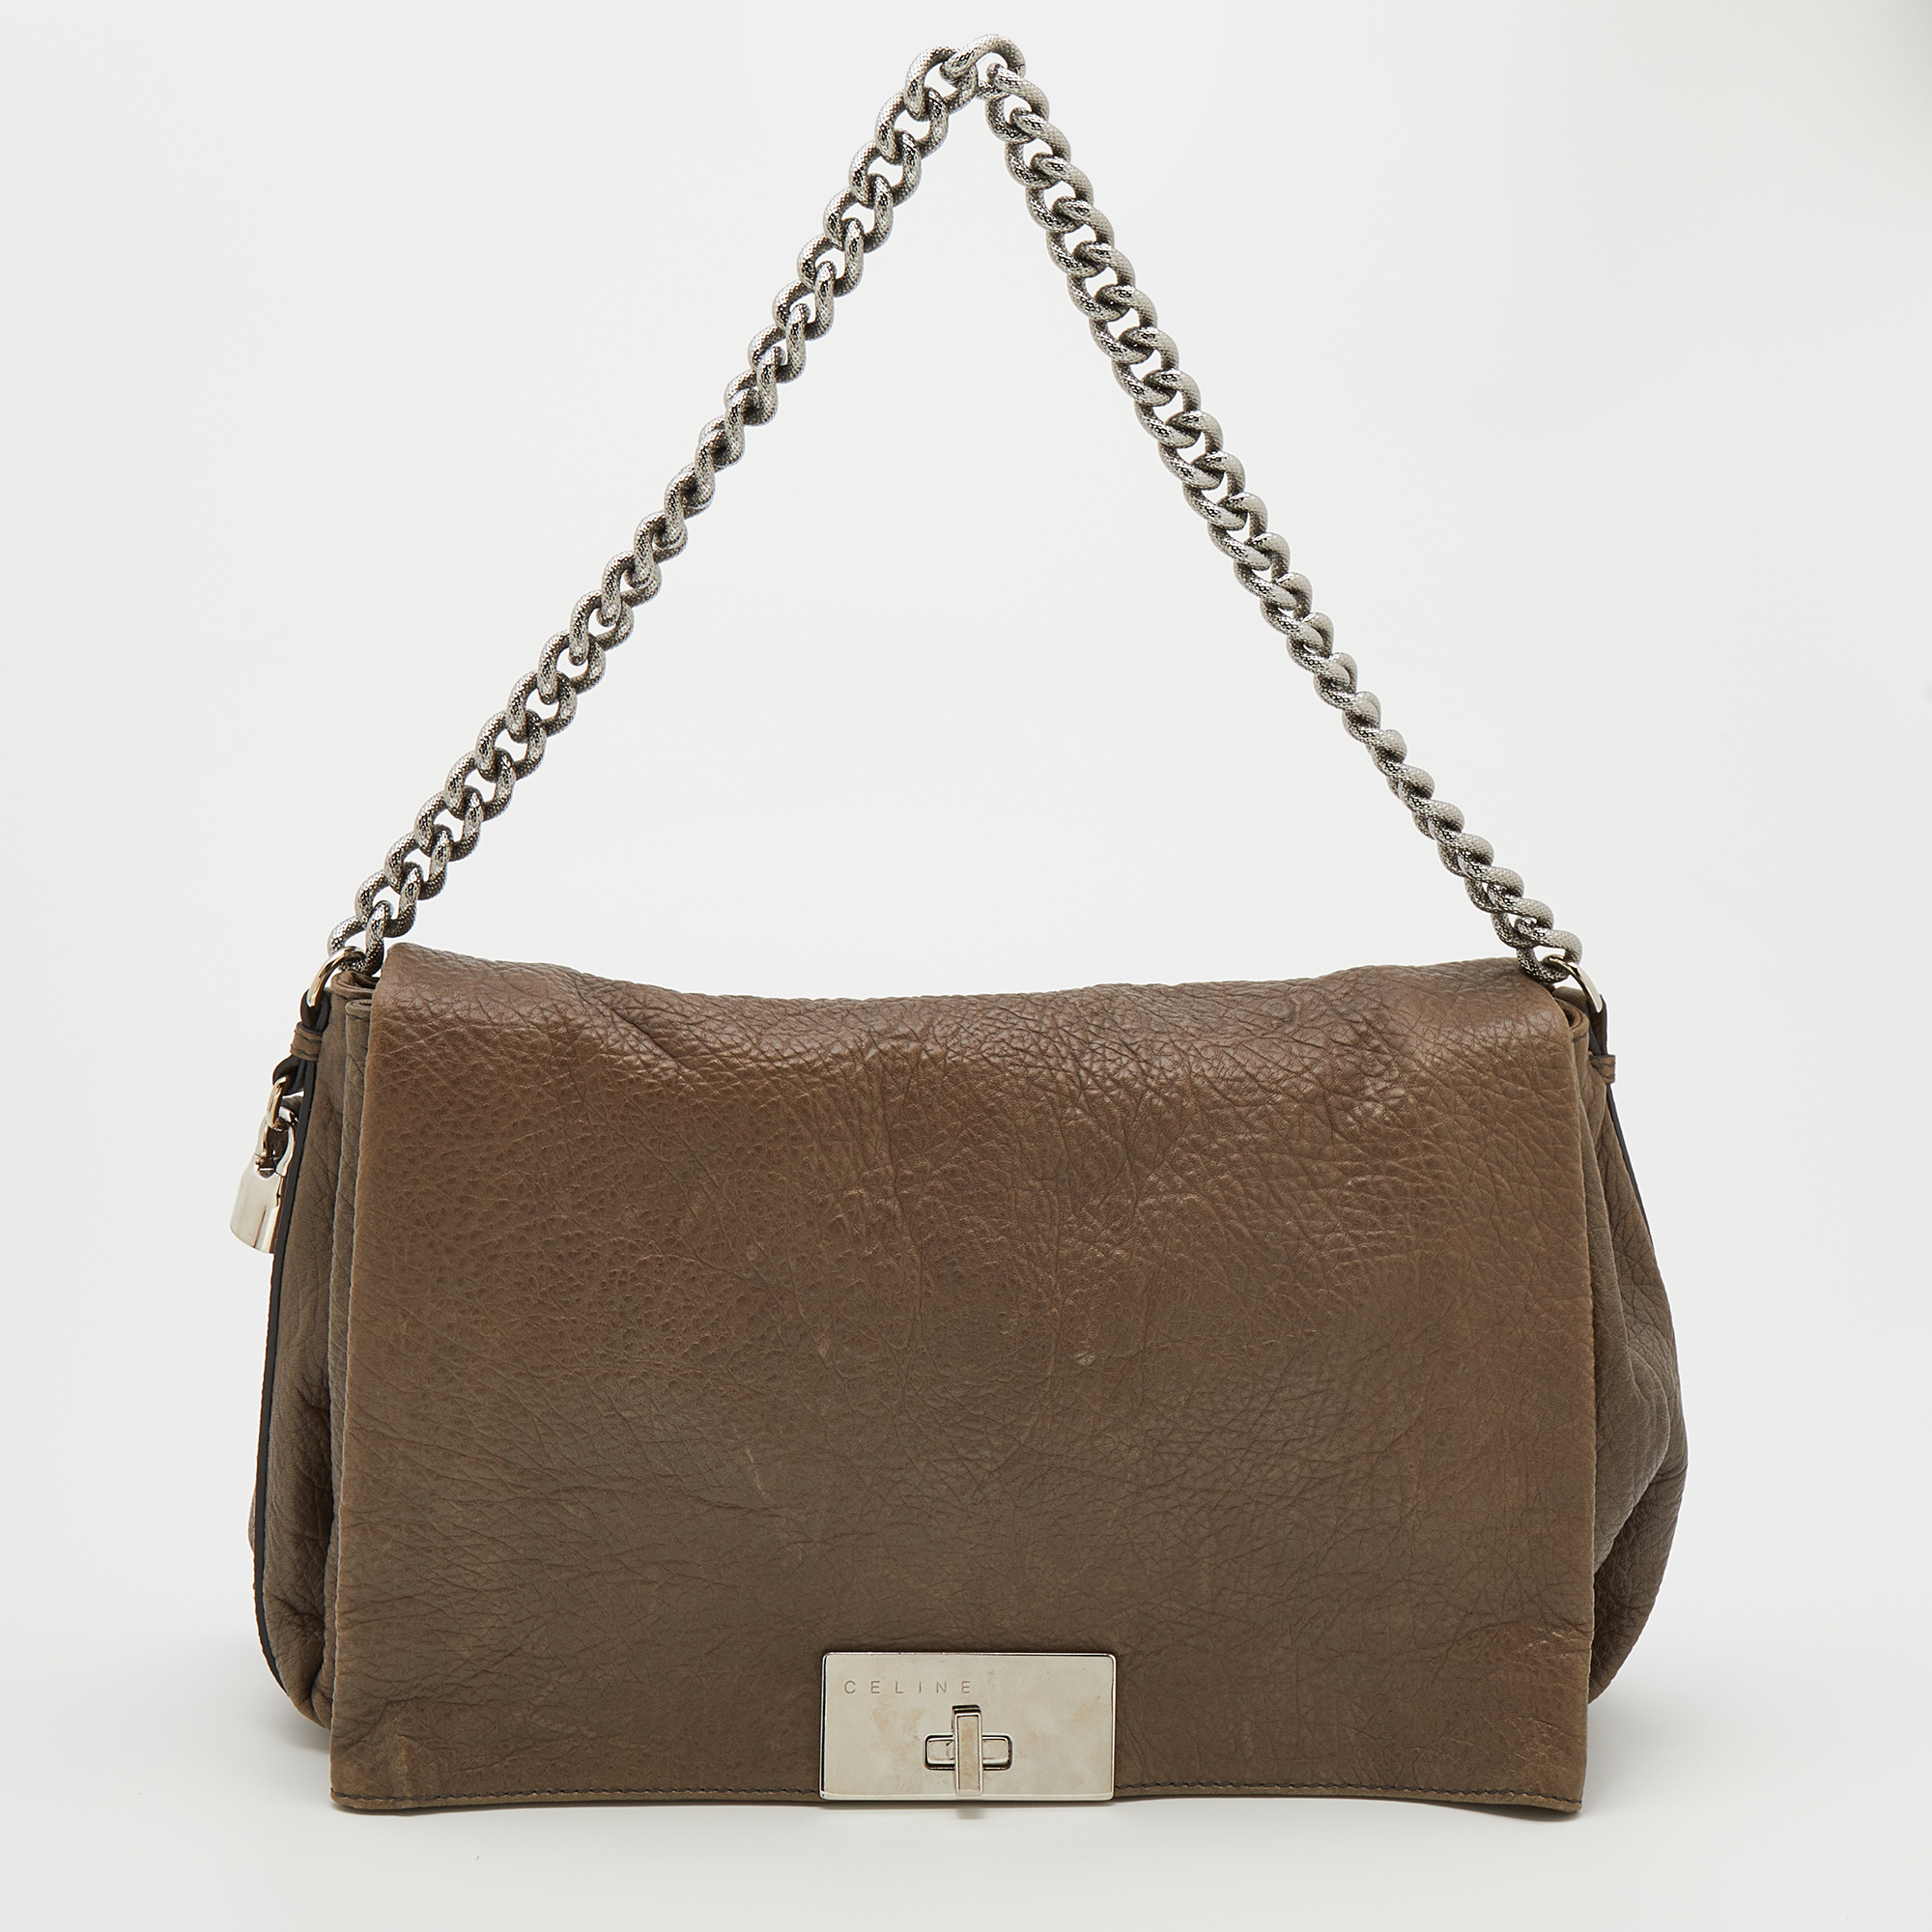 This elegant shoulder bag is perfect for your next outing to town. It is made of high quality leather and can match a day or evening outfit. It has a comfortable handle and a lined interior for all your essentials.